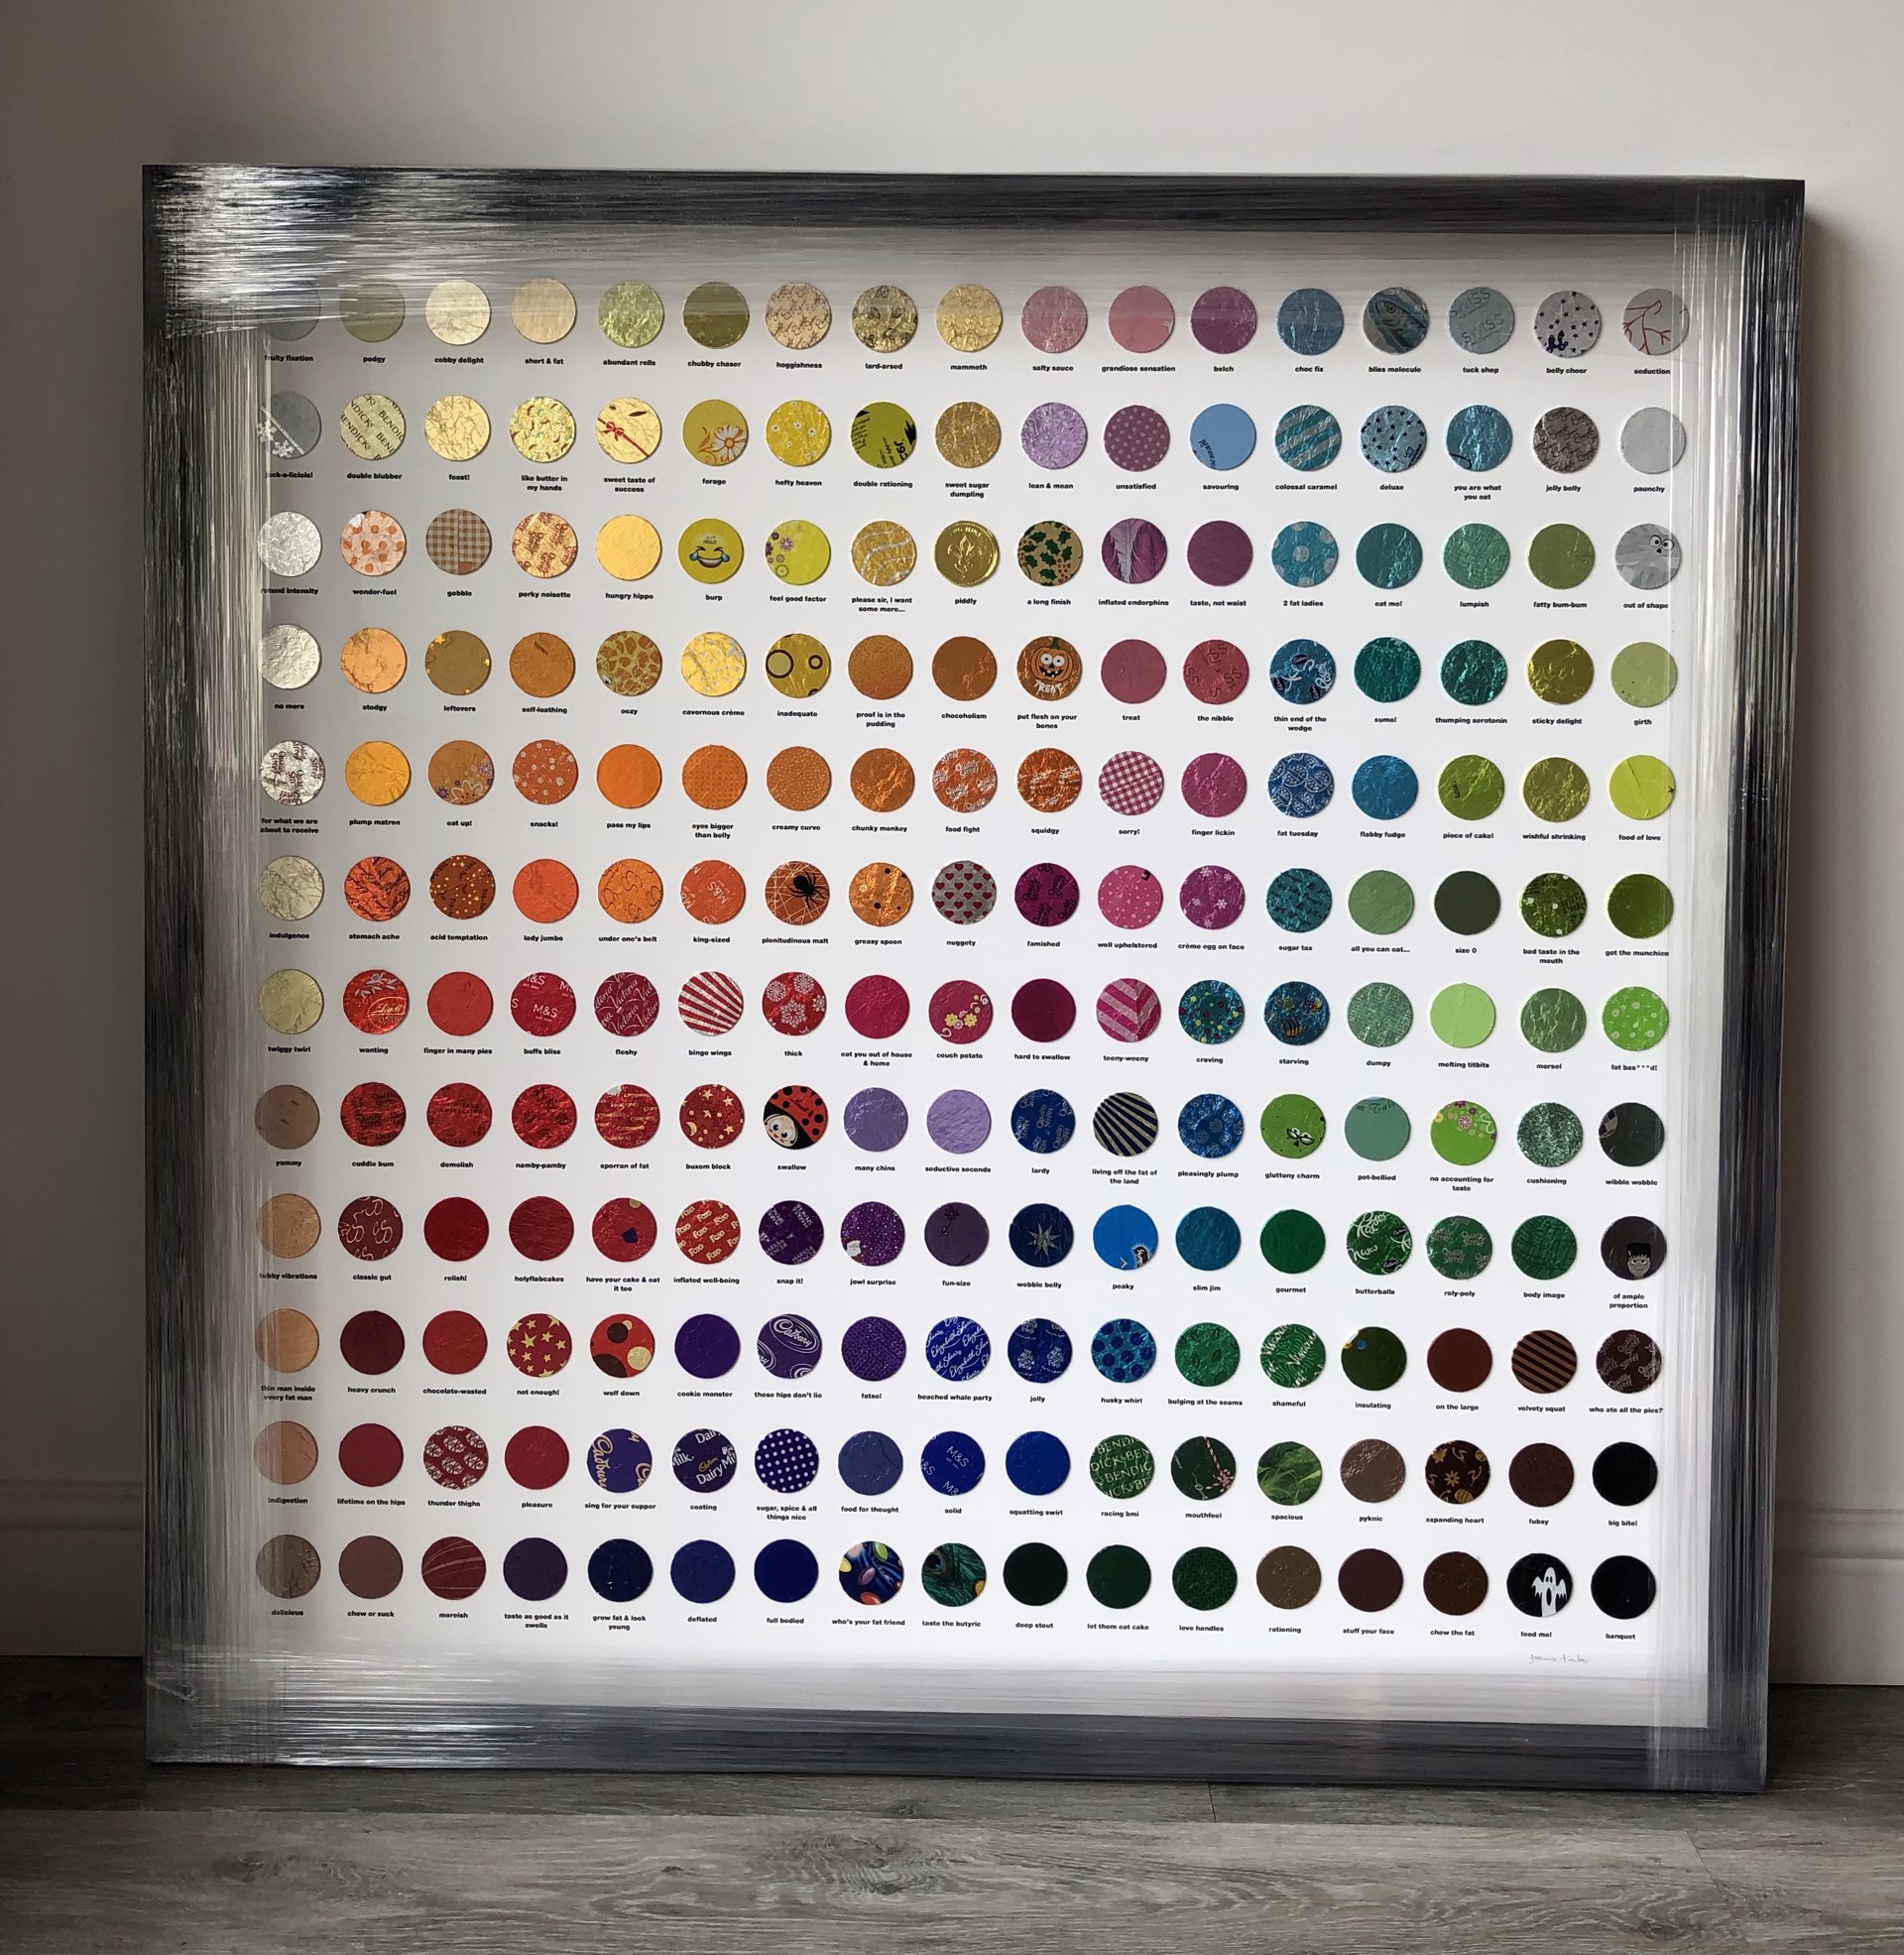 Indulgence - Colour Chart by Joanne Tinker